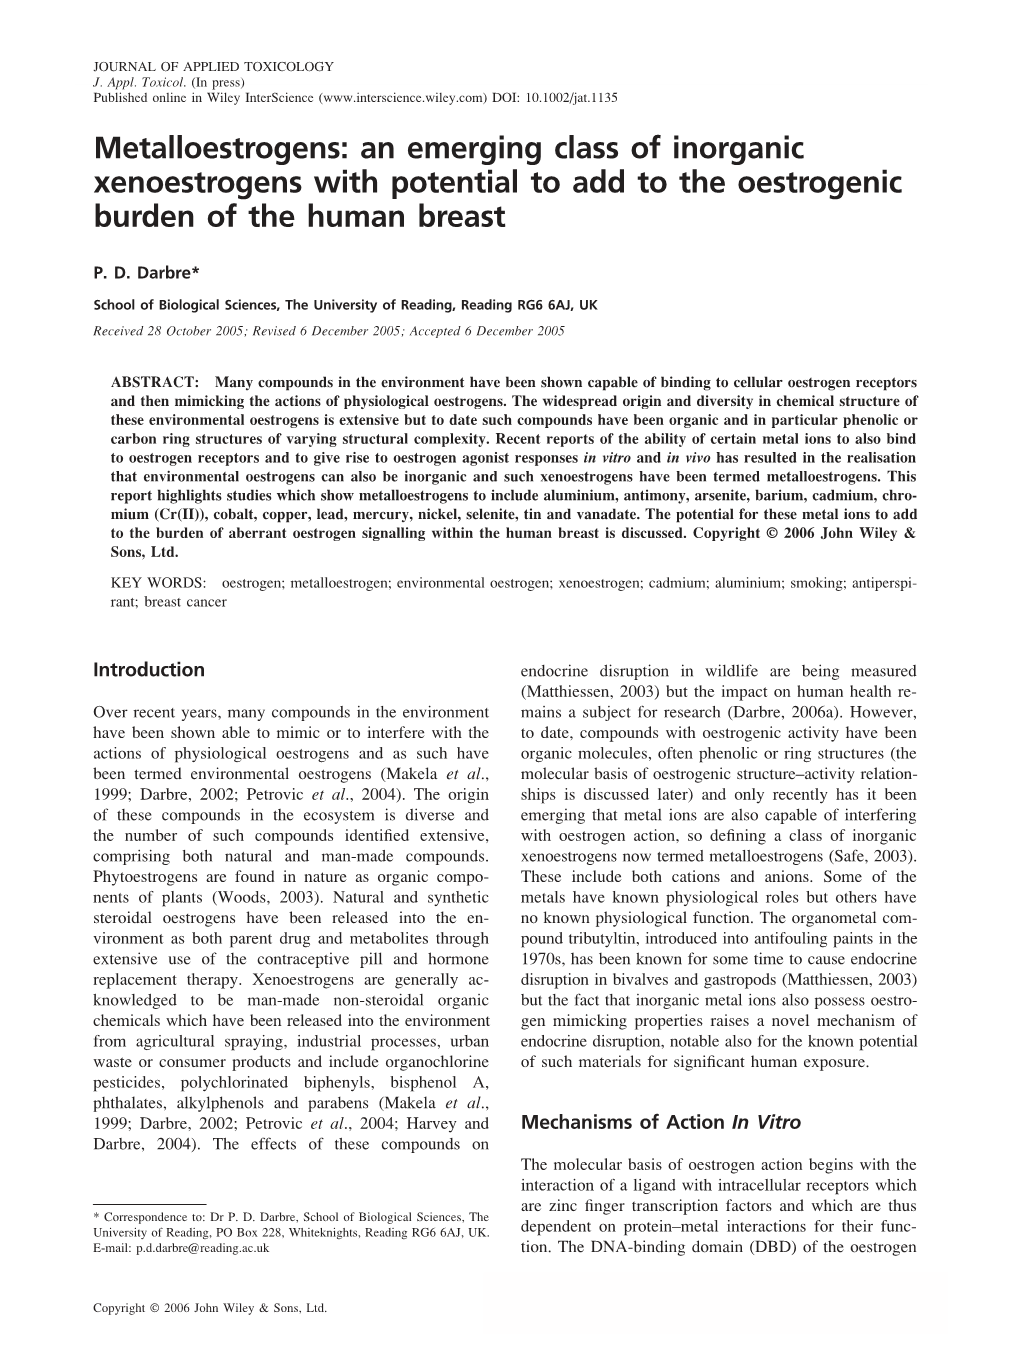 Metalloestrogens: an Emerging Class of Inorganic Xenoestrogens with Potential to Add to the Oestrogenic Burden of the Human Breast